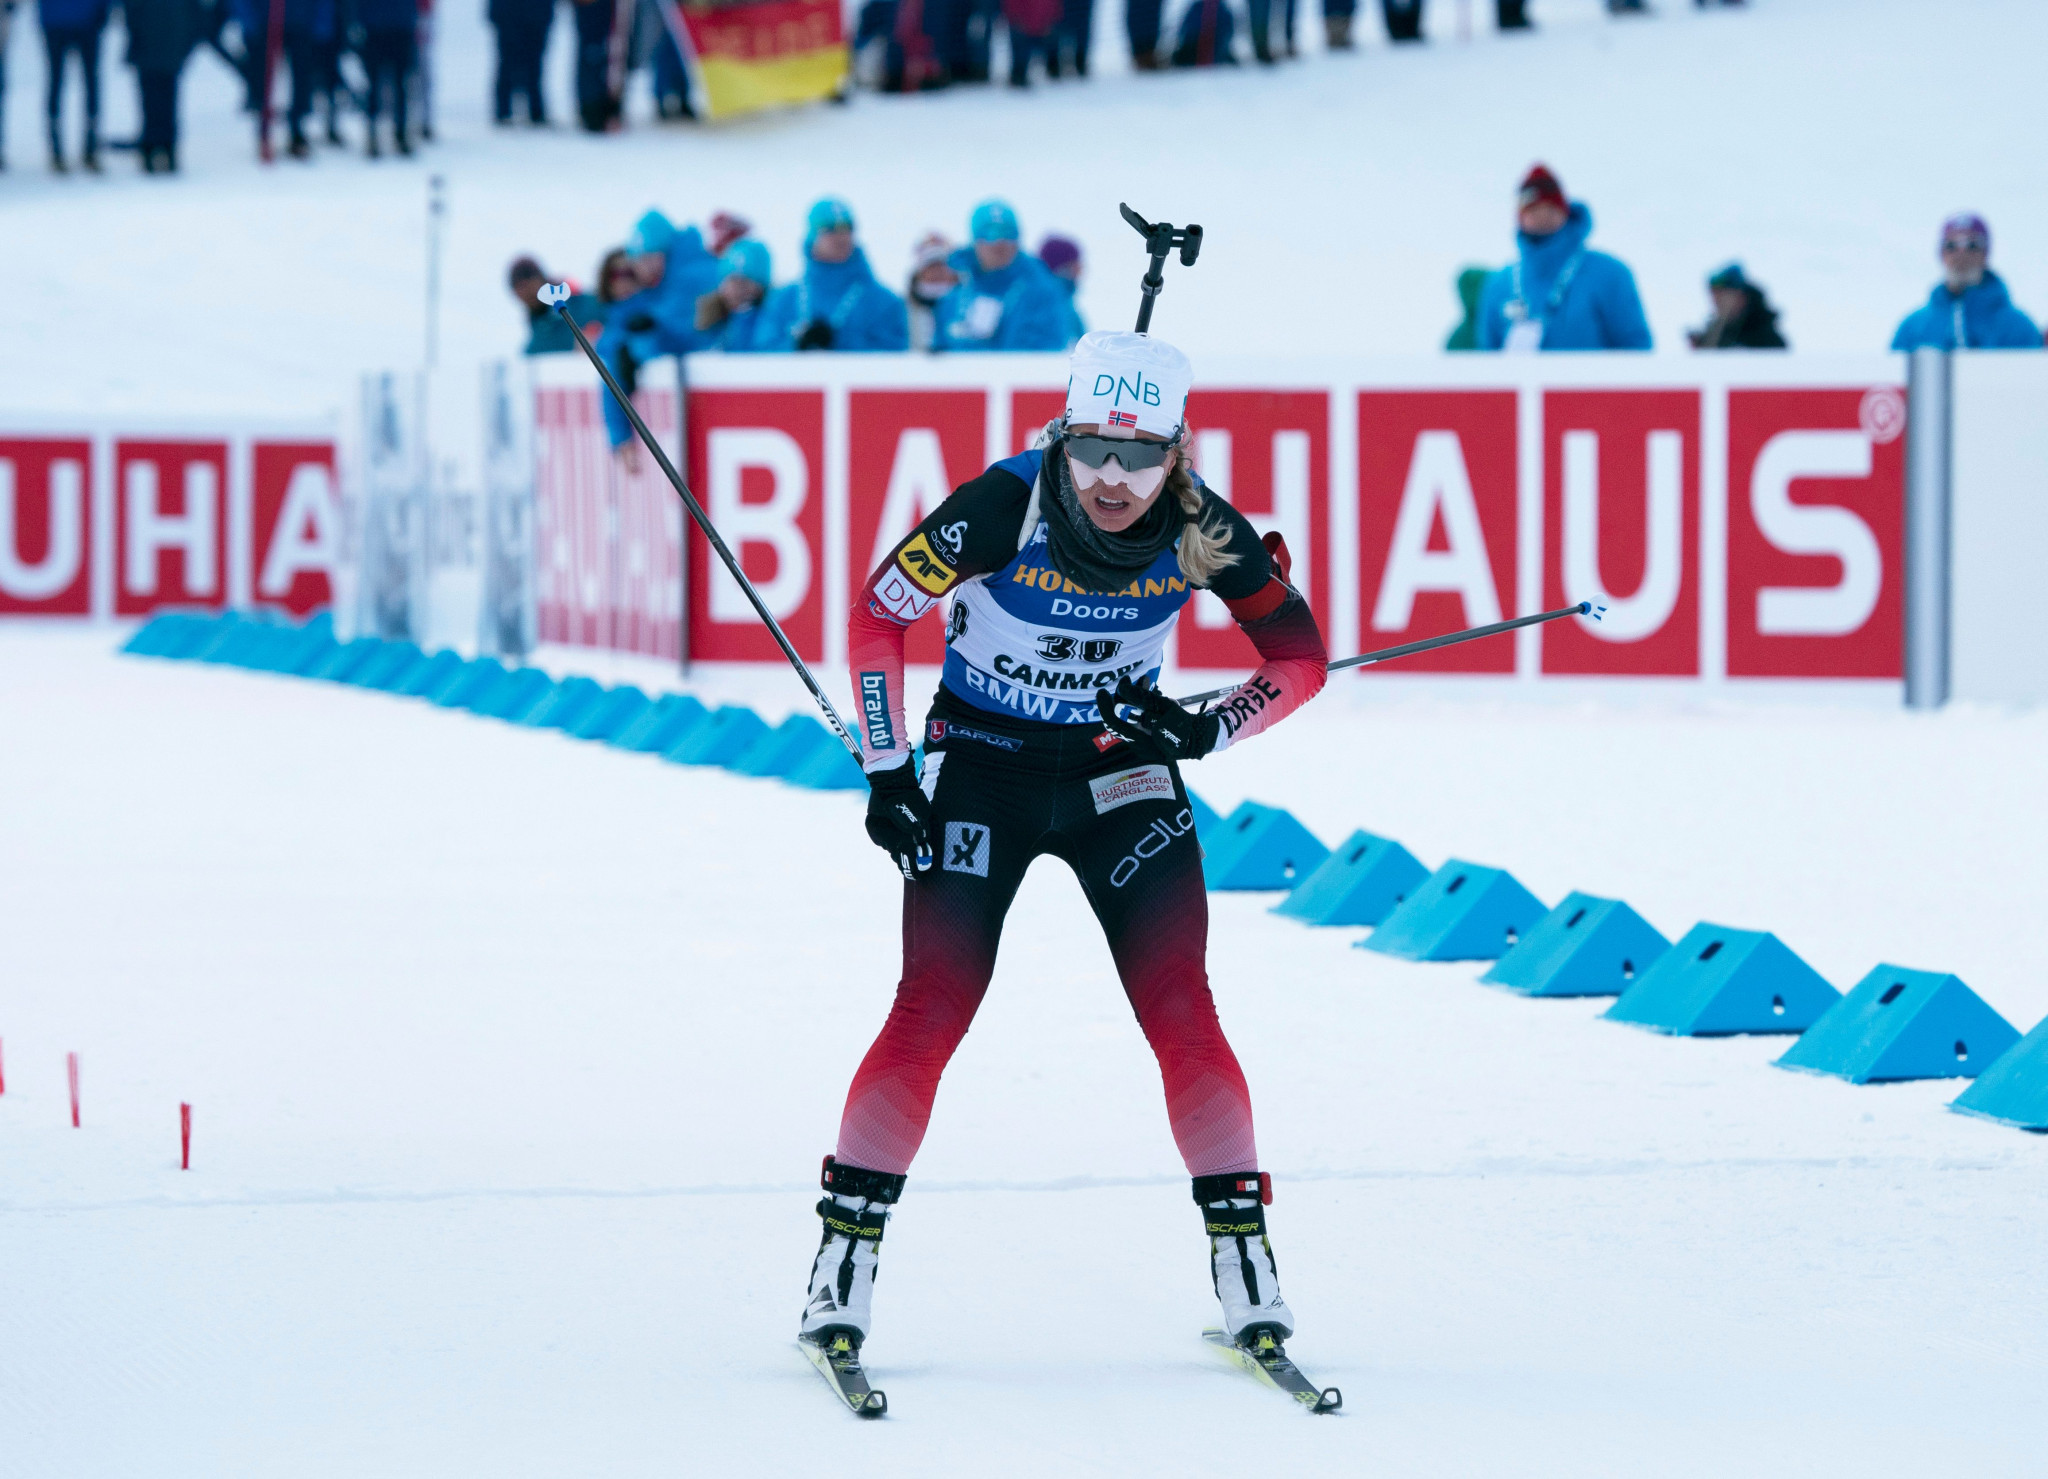 Eckhoff and Bø claim short individual victories at IBU World Cup in Canmore